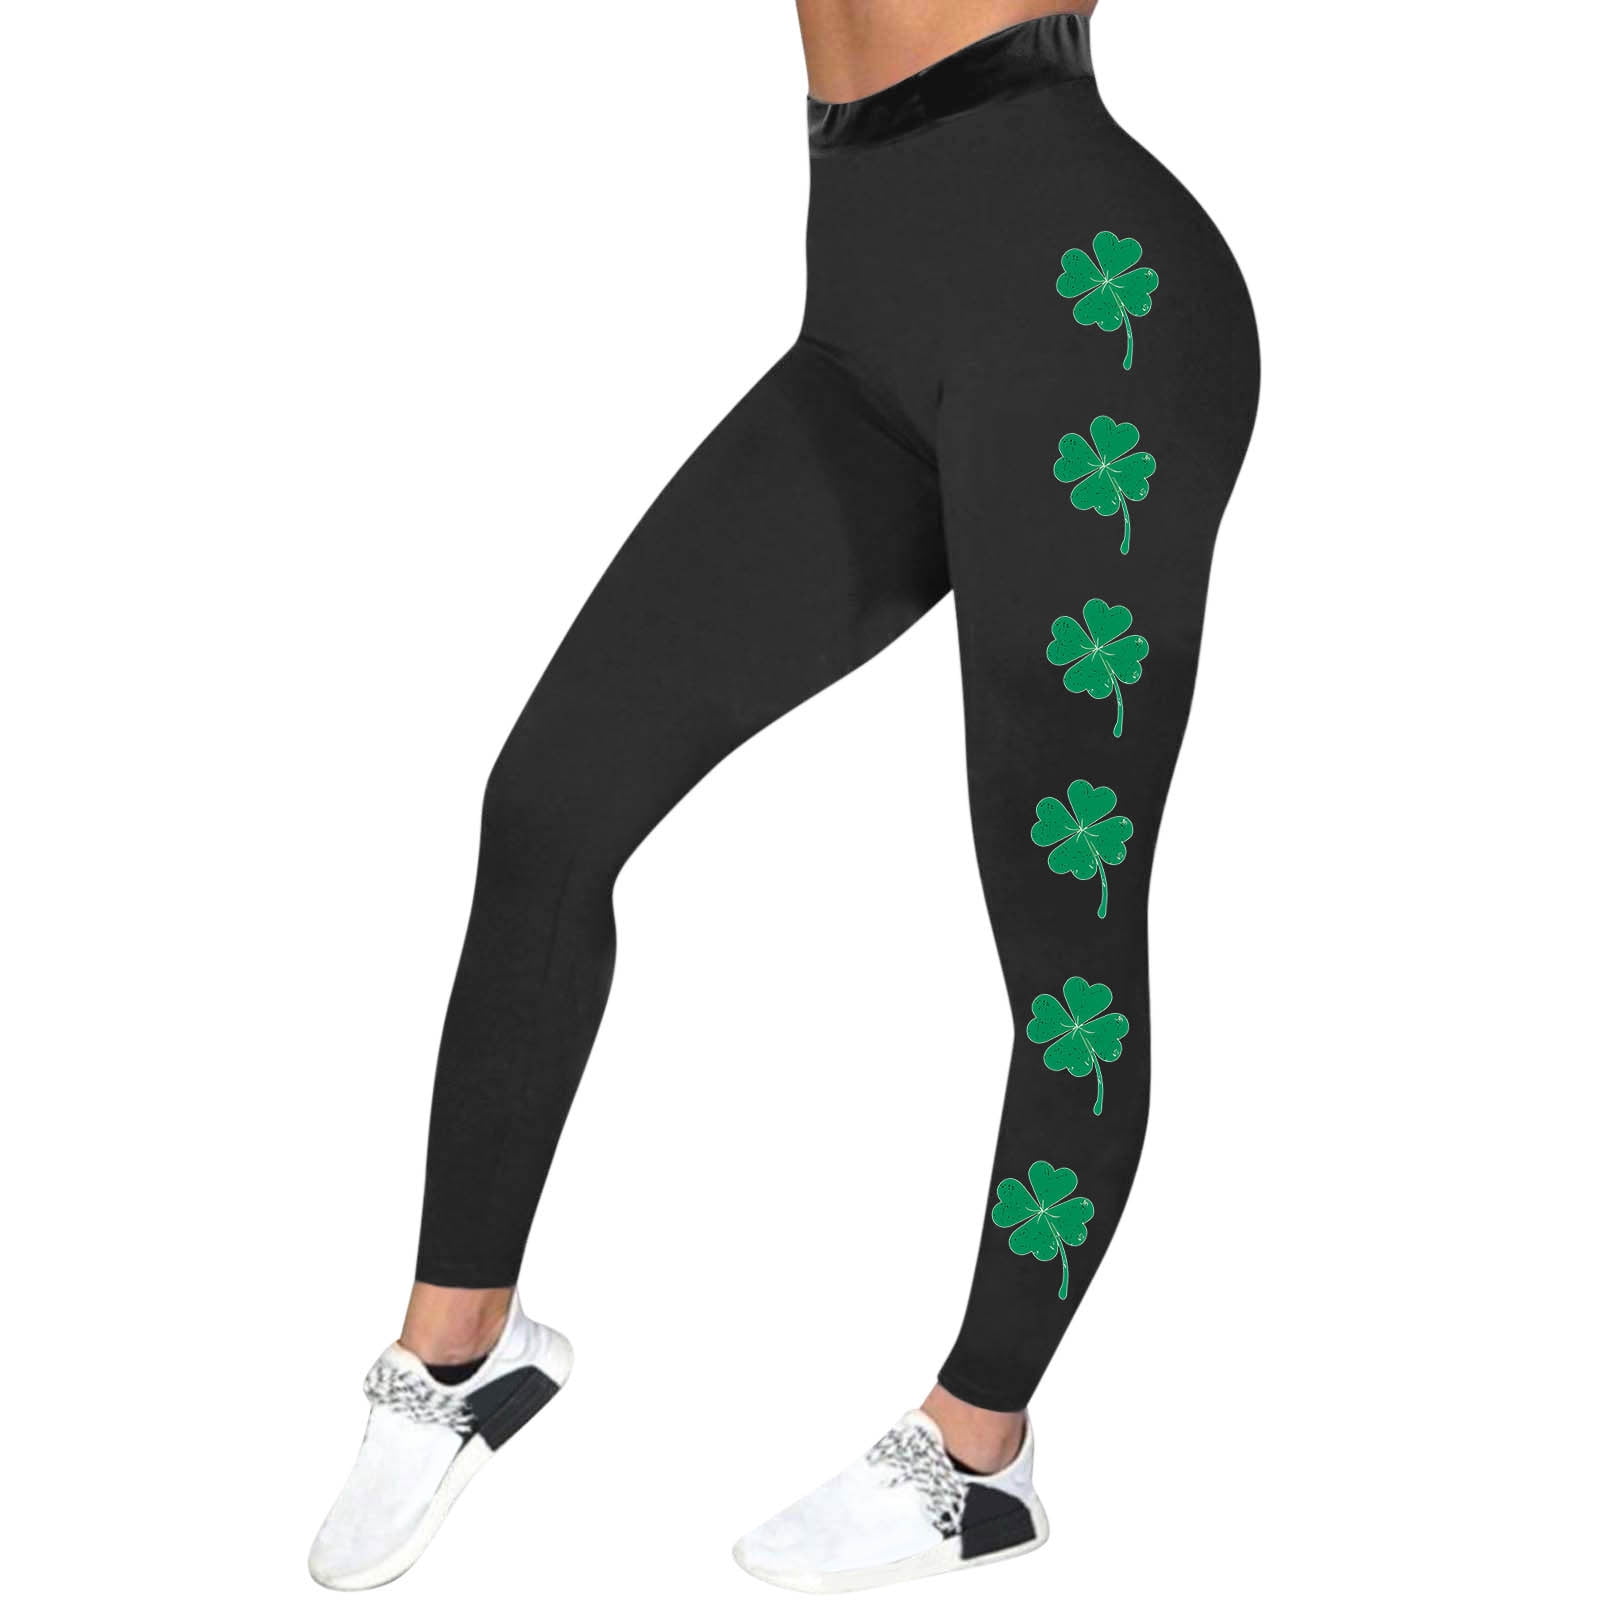 These are the cutest Halara leggings ever! The best leggings for